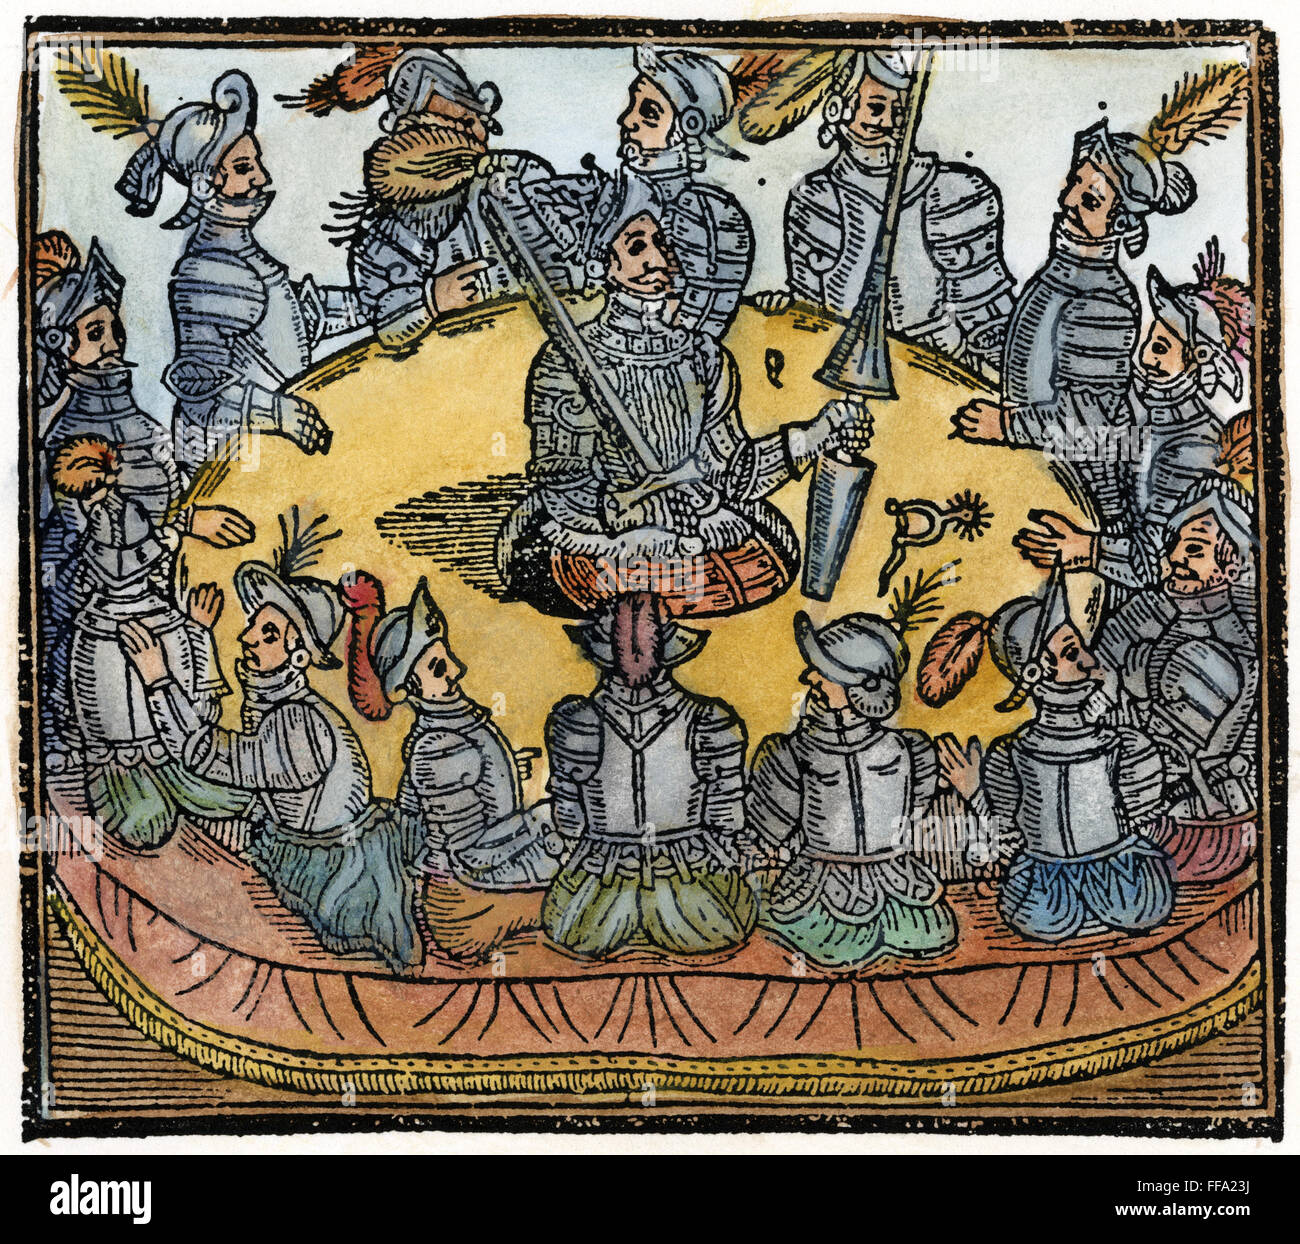 KING ARTHUR & KNIGHTS. /nKing Arthur and the Knights of the Round Table. Frontispiece woodcut from 'History of Prince Arthur,' 1534. Stock Photo